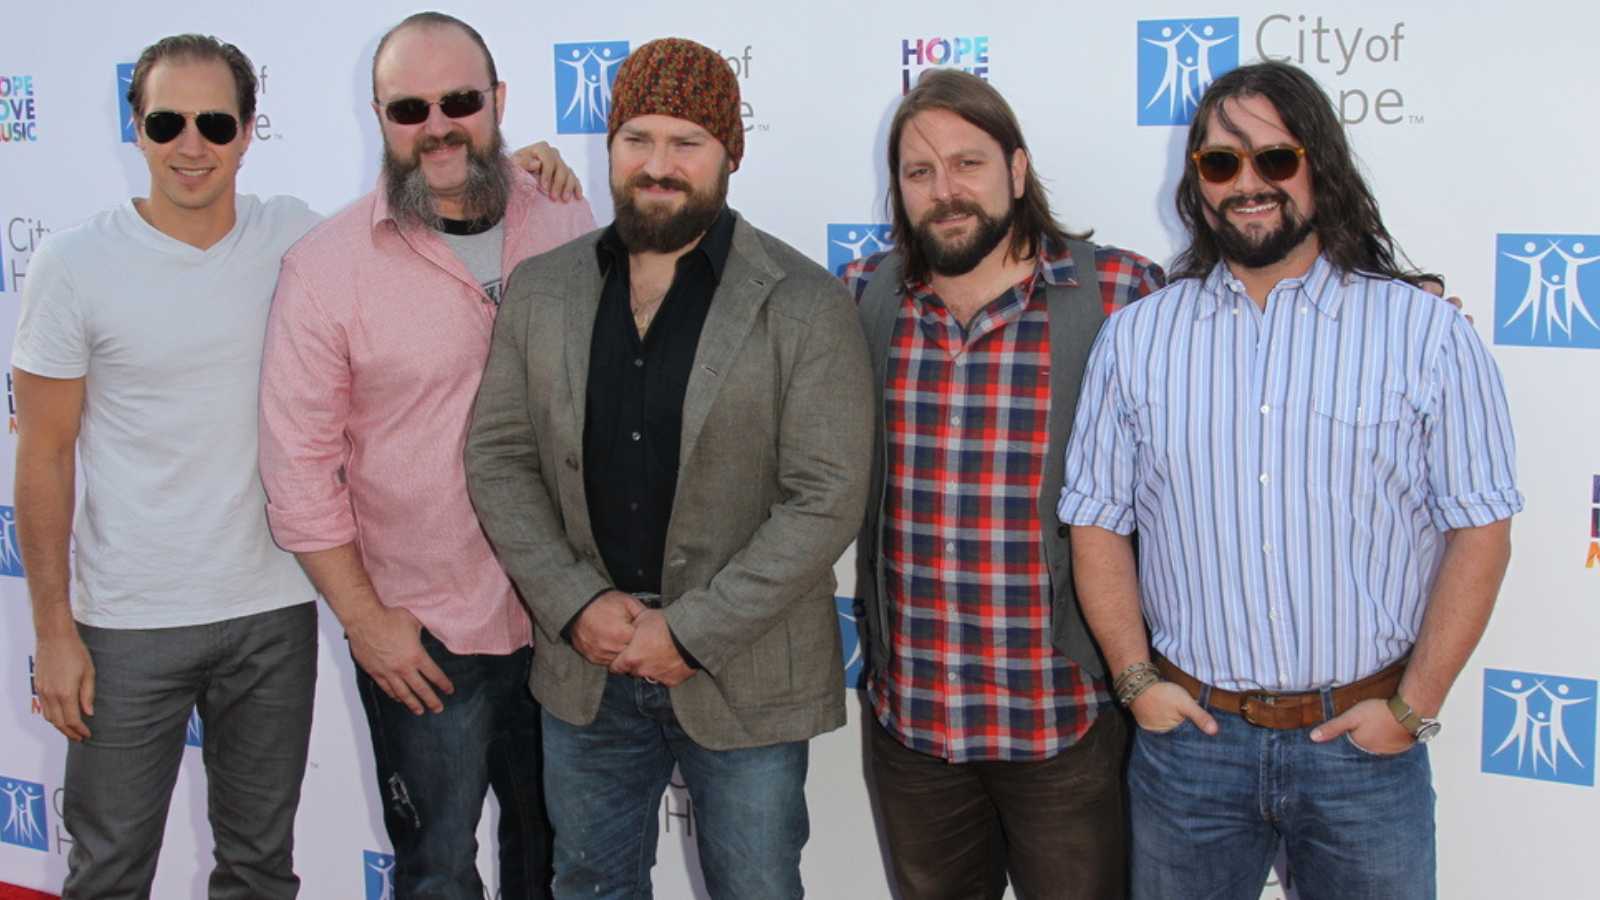 LOS ANGELES - JUN 12: Zac Brown Band arrives at the City of Hope's Music And Entertainment Industry Group Event at The Geffen Contemporary at MOCA on June 12, 2012 in Los Angeles, CA